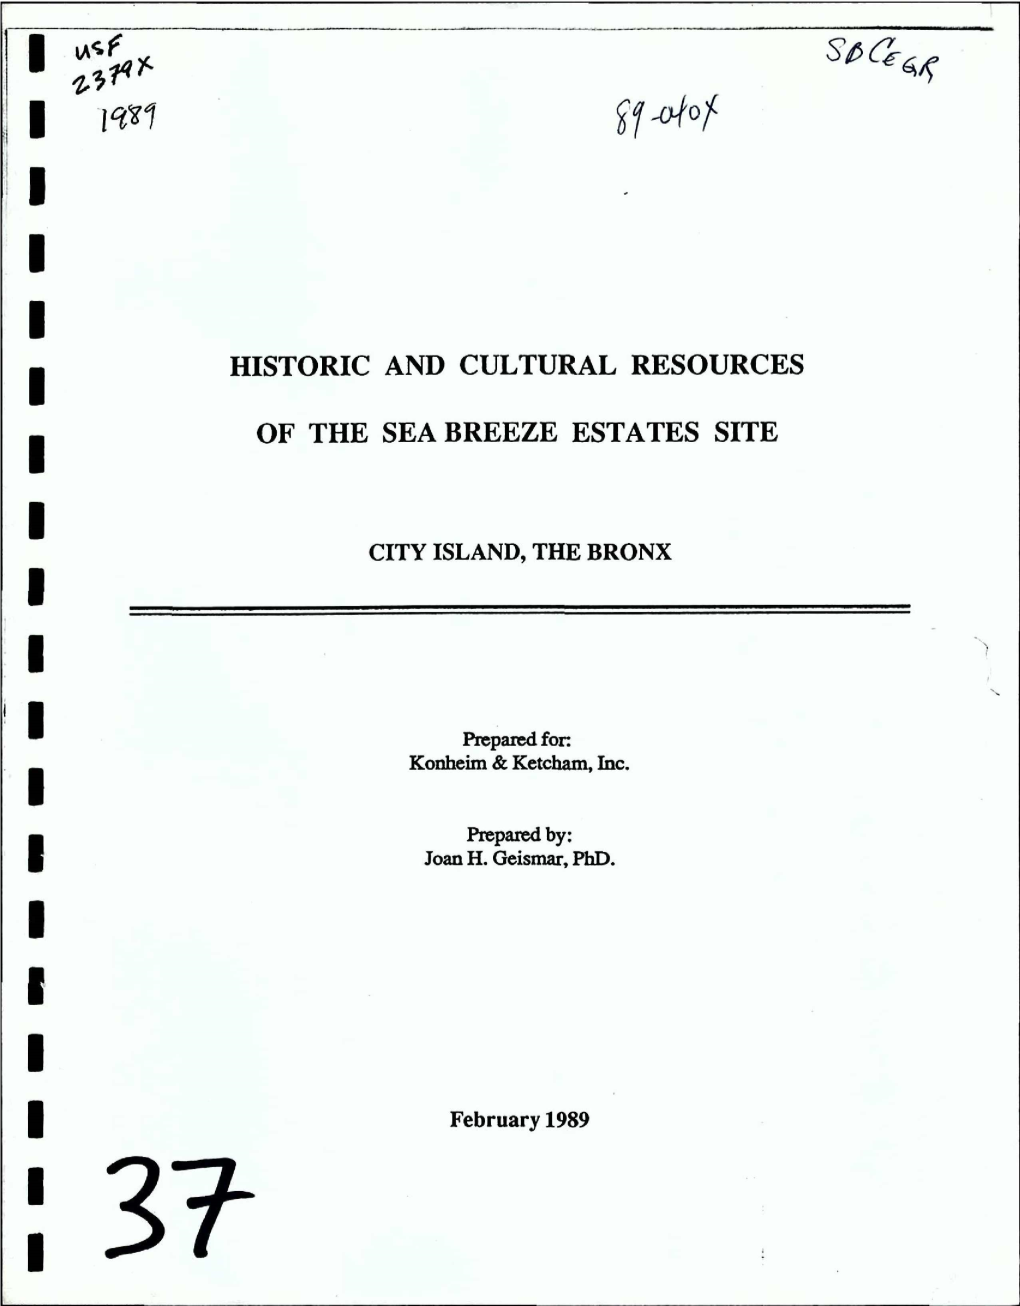 Historic and Cultural Resources of the Sea Breeze Estates Site on City Island in T~E Bronx